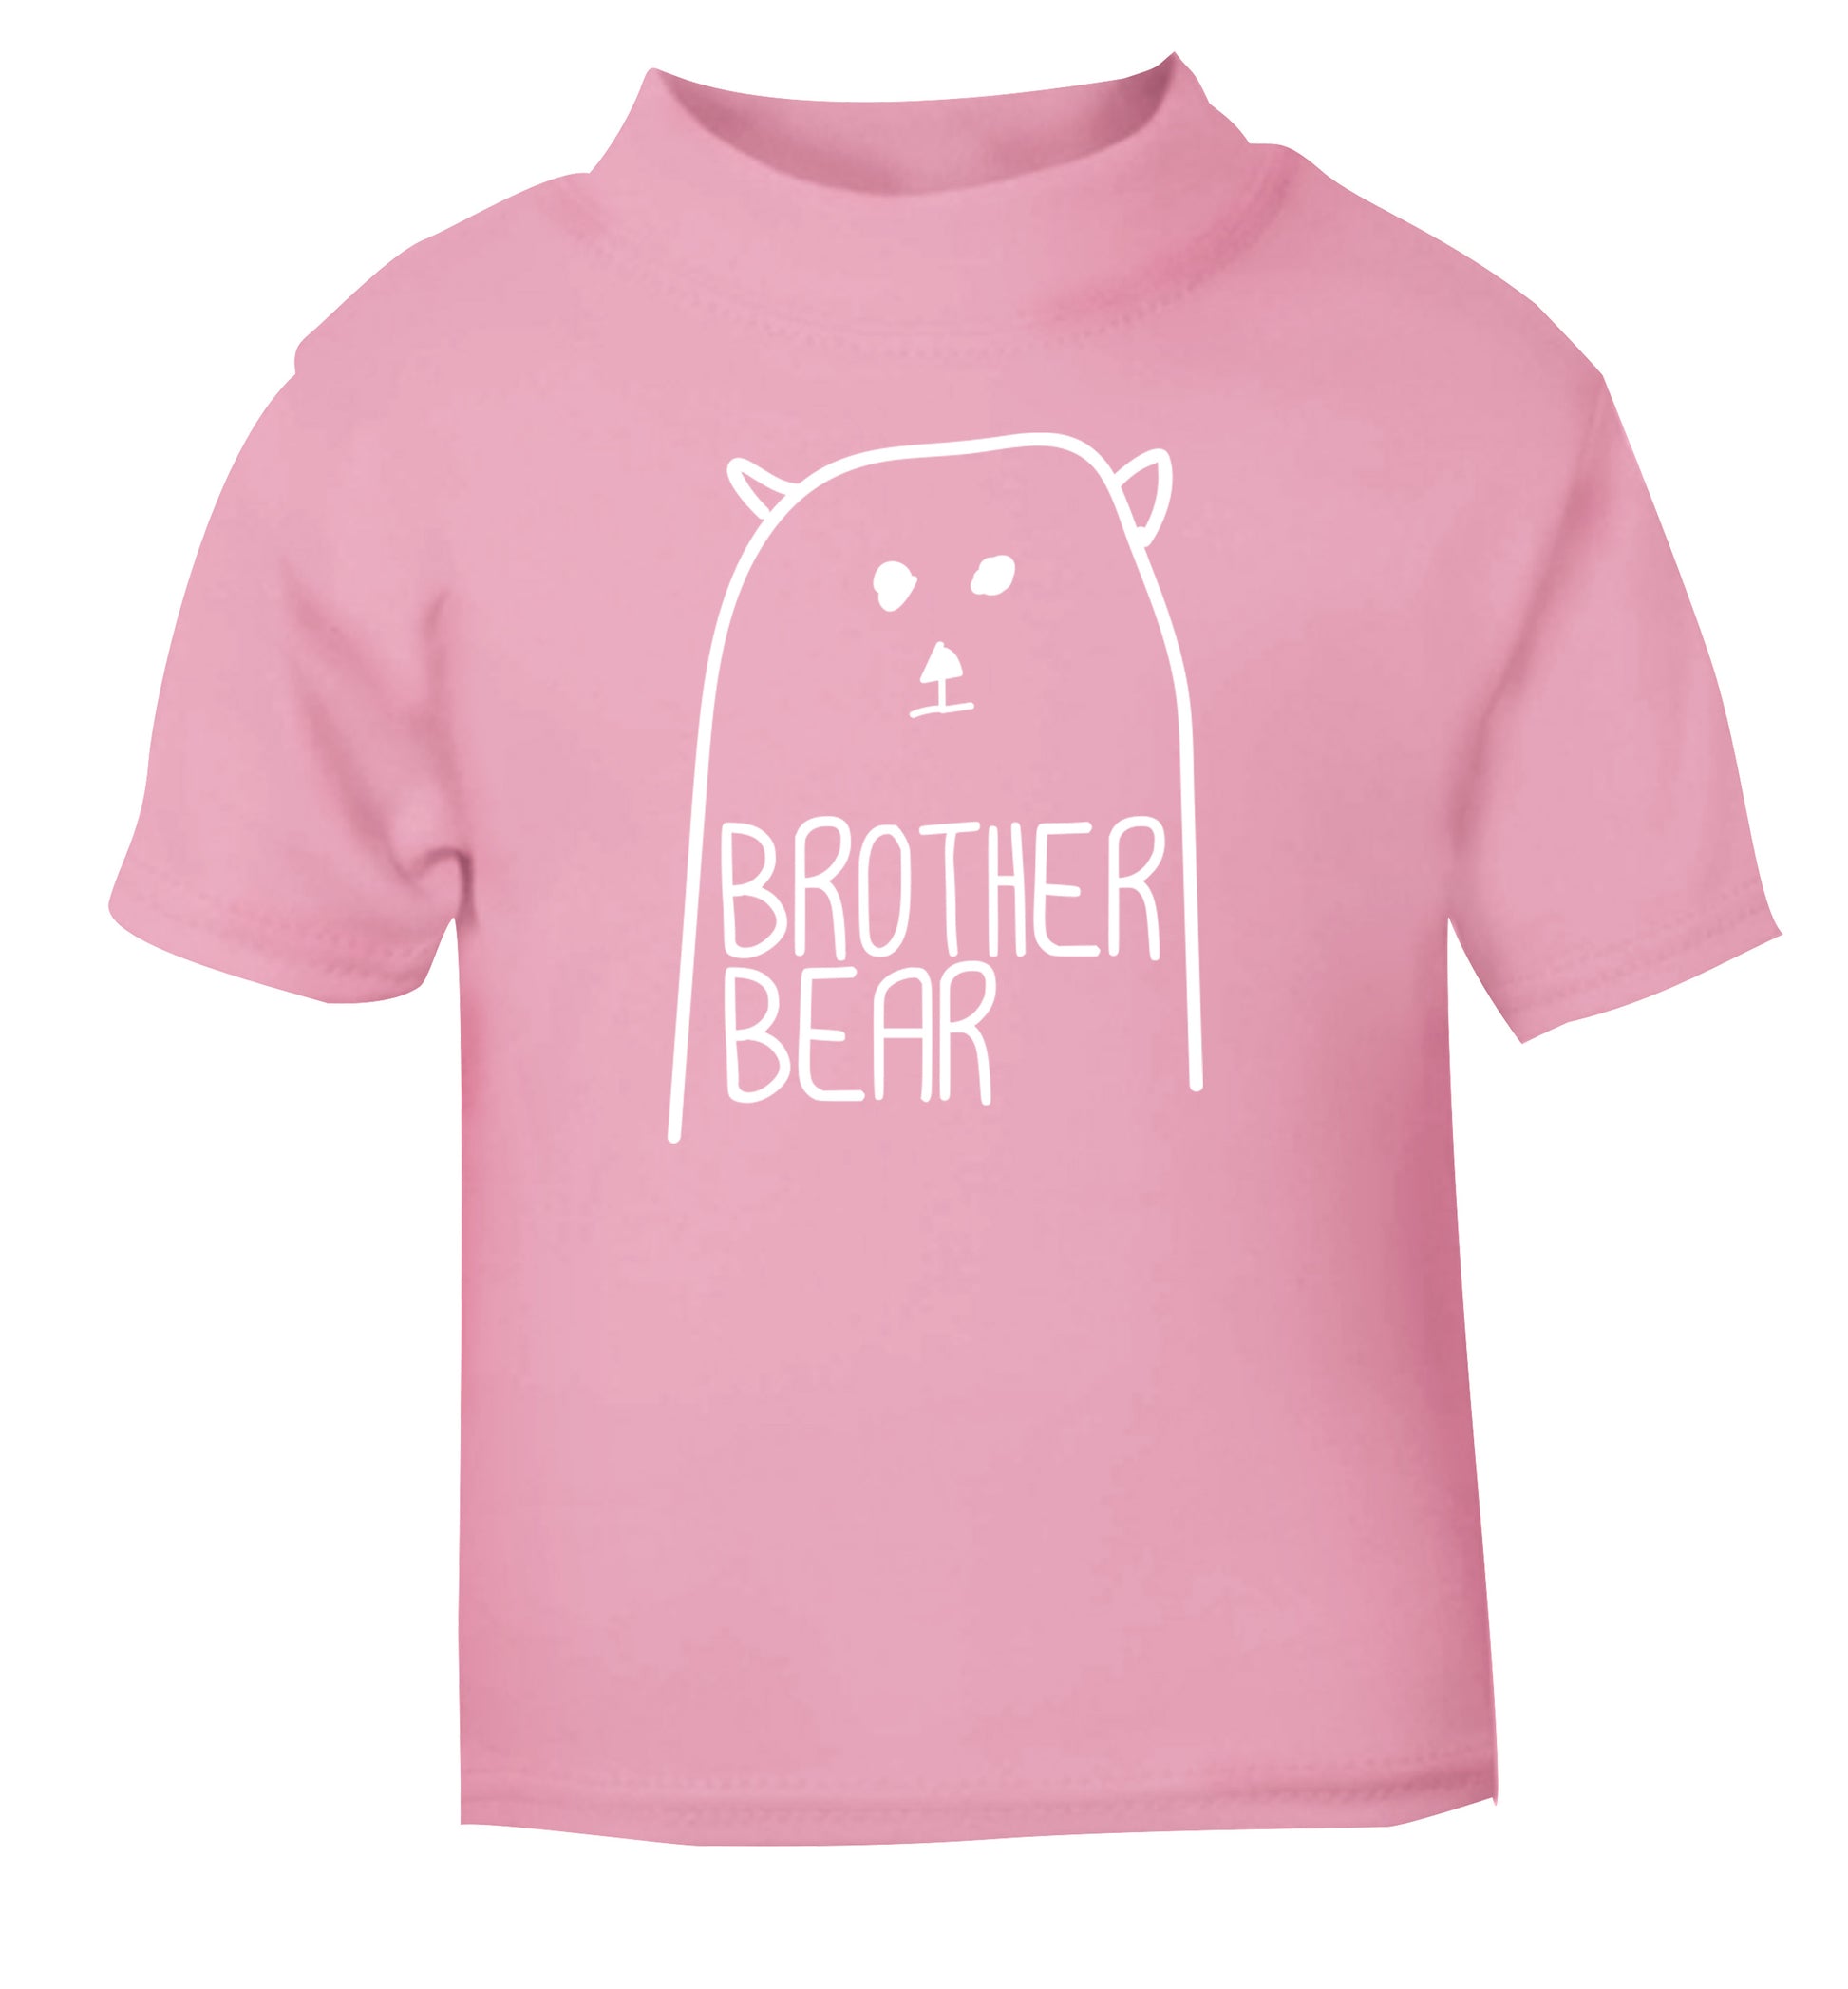 Brother bear light pink Baby Toddler Tshirt 2 Years